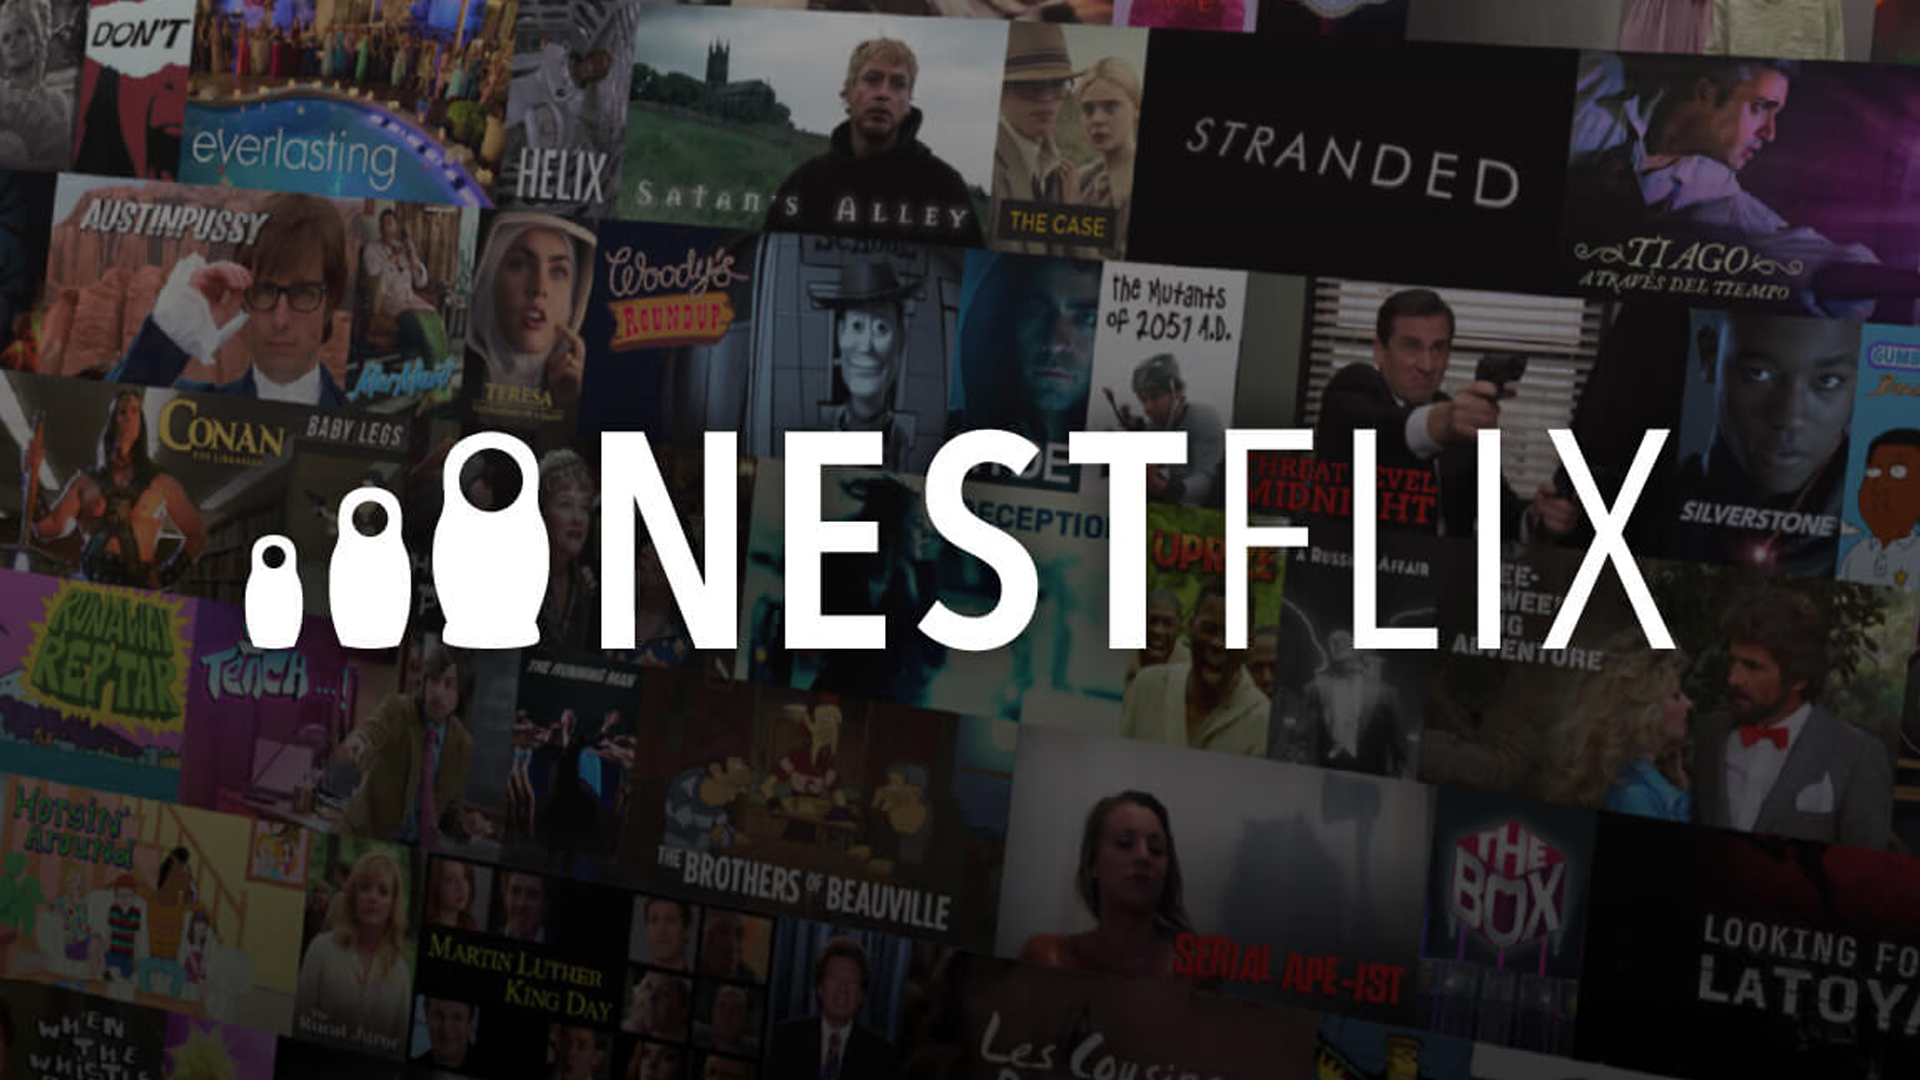 Attain Check Out Nestflix, the Netflix-Esteem Carrier for Inaccurate TV Reveals and Movies